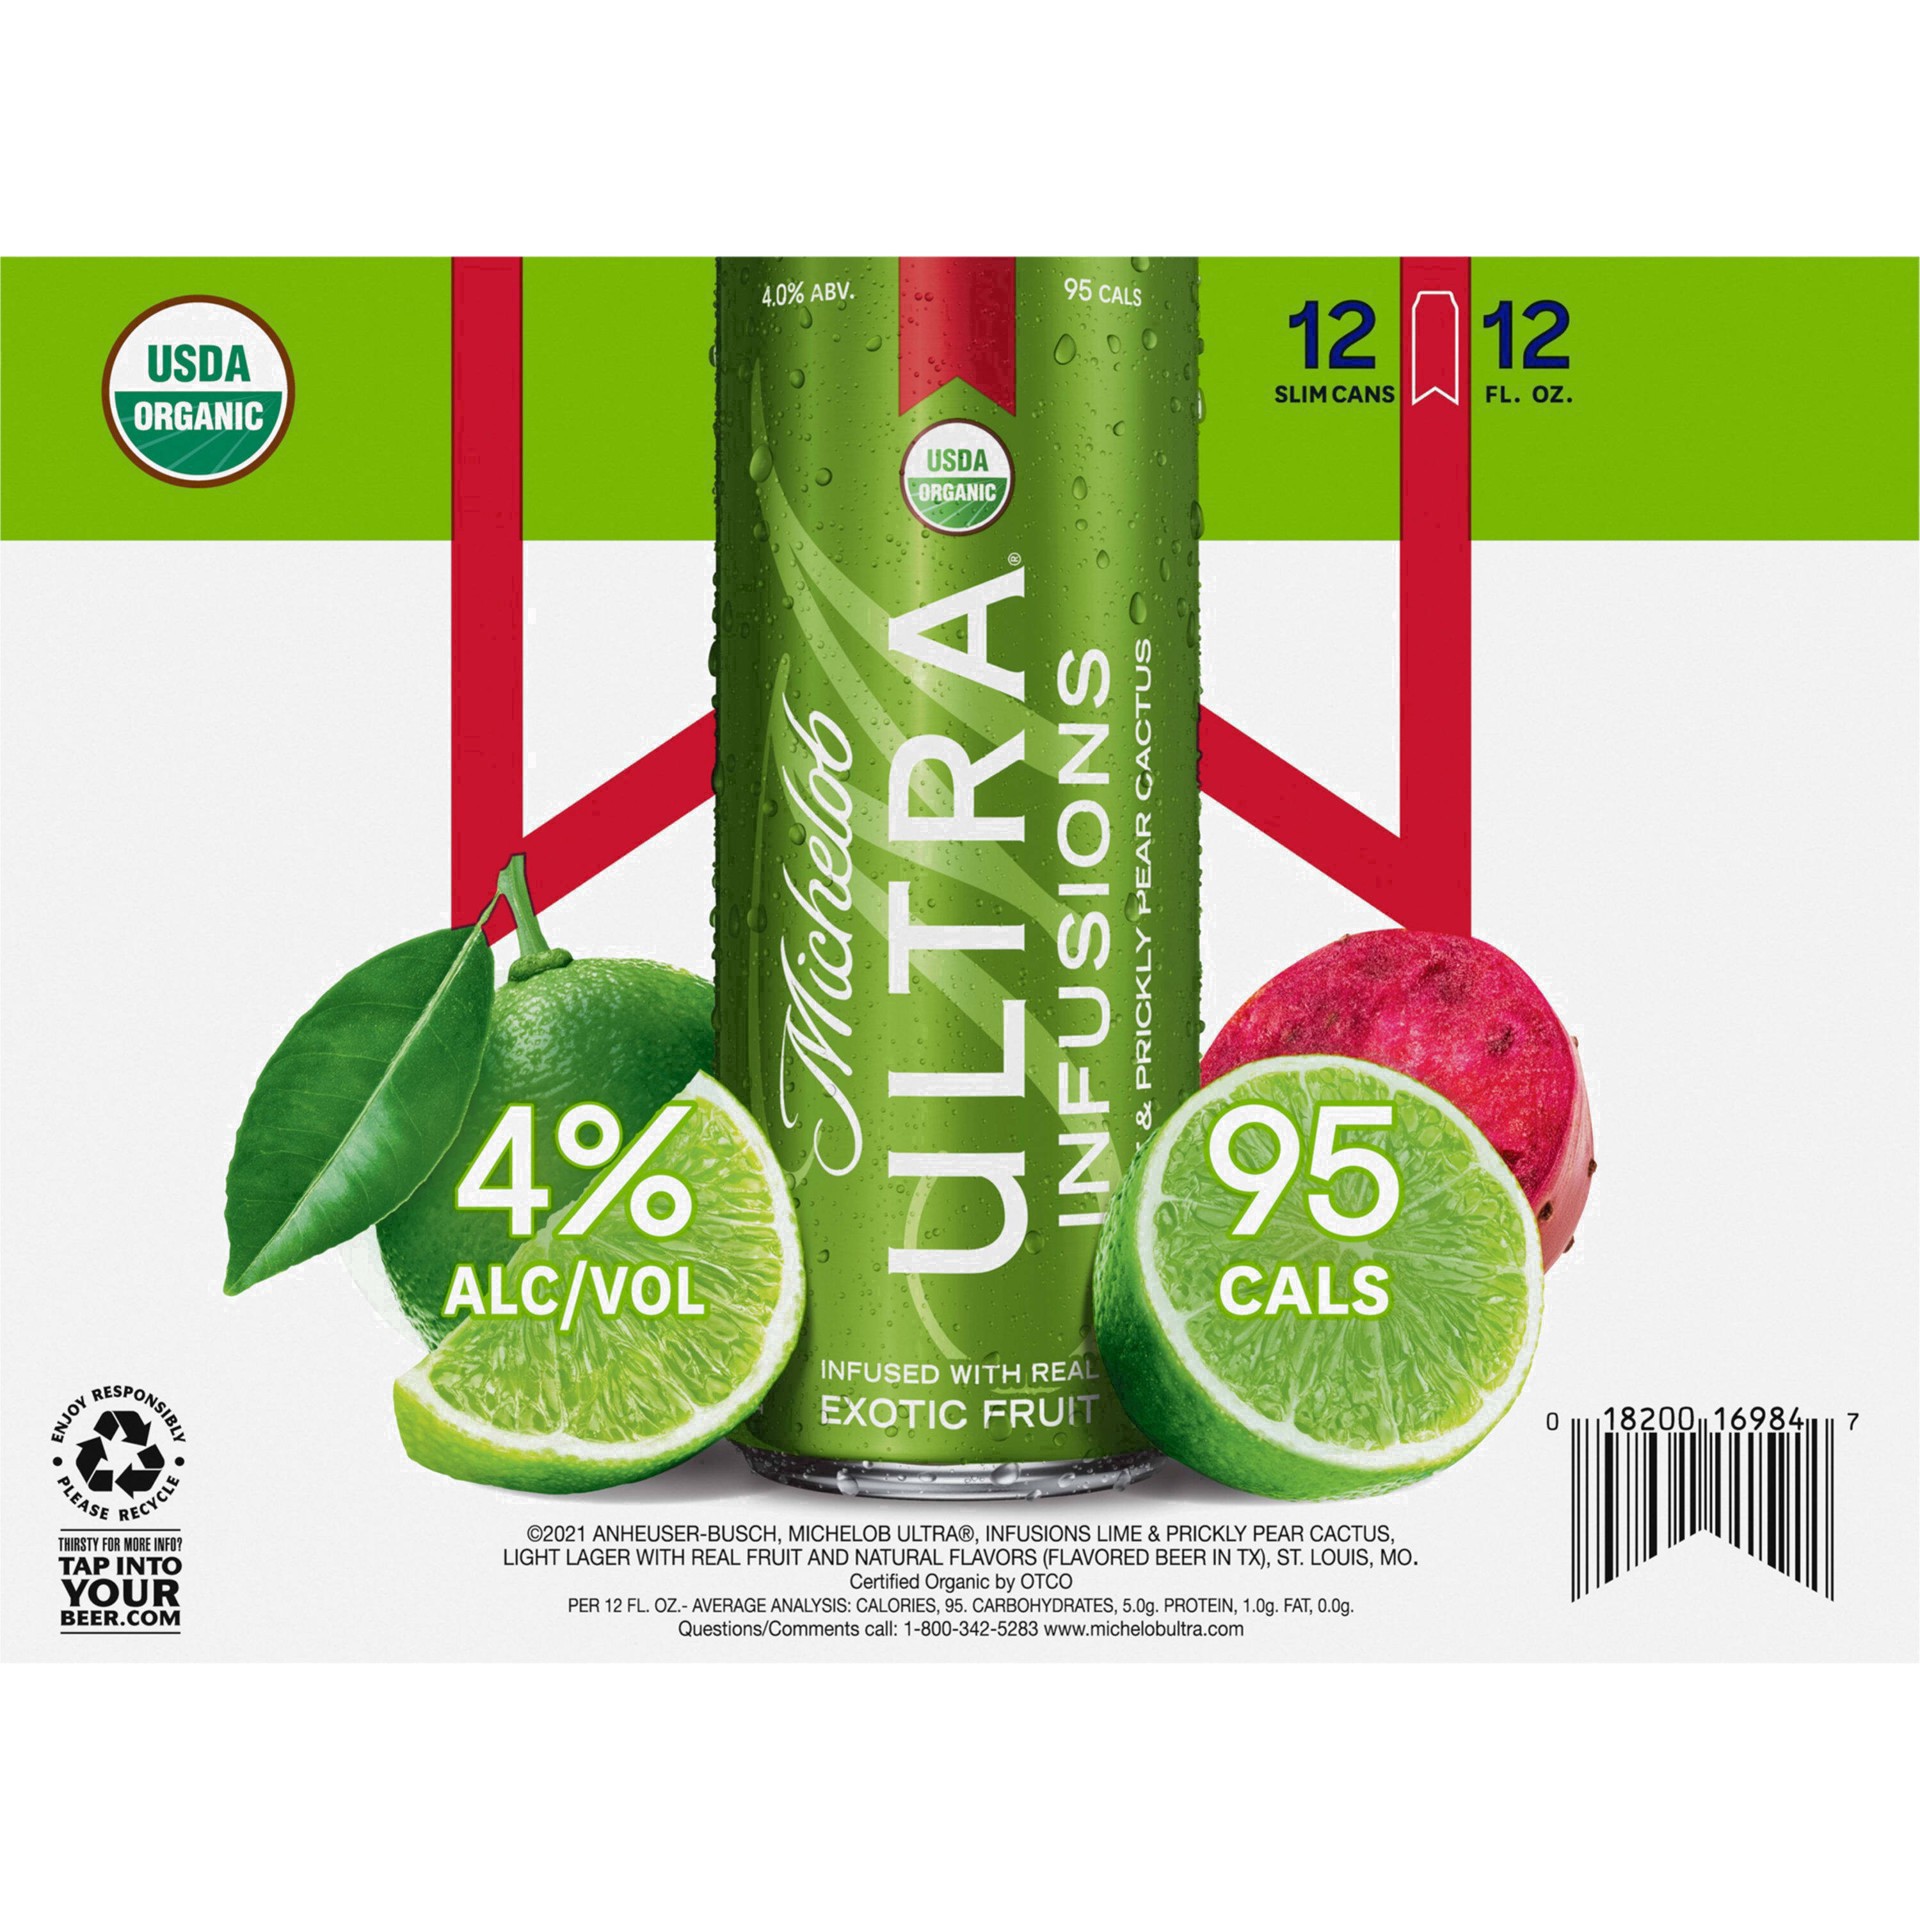 slide 10 of 99, Michelob Ultra Infusions Lime & Prickly Pear Cactus Light Beer, 4% ABV, 12 ct; 12 fl oz